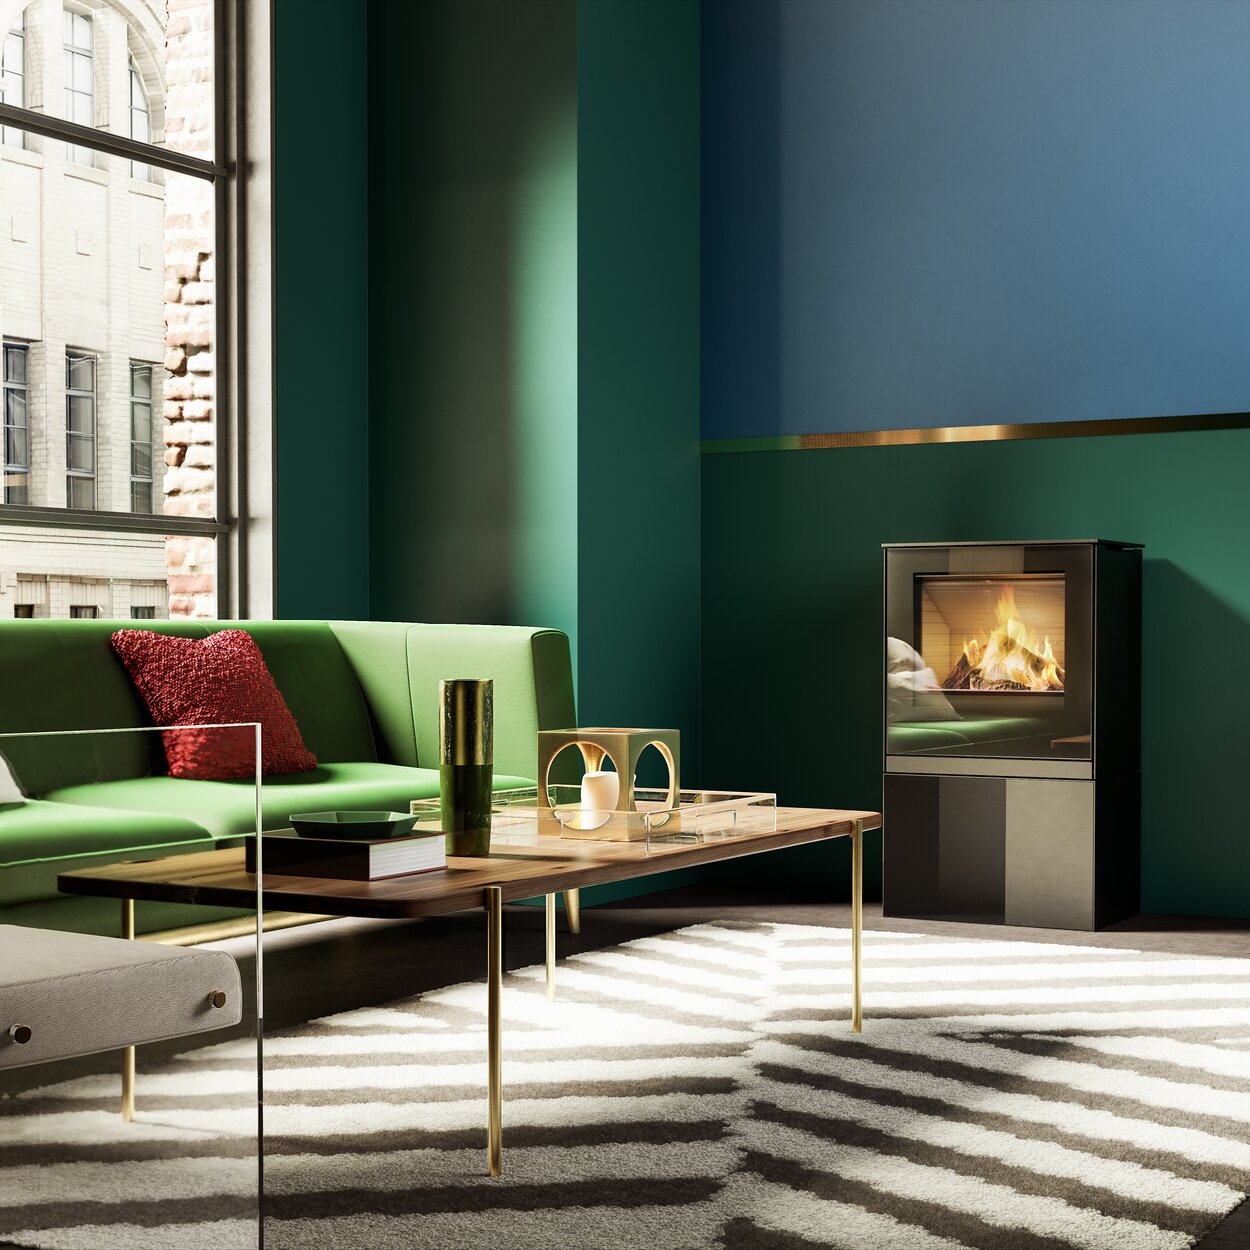 Gas stove Q-TEE 2 with glass door and base unit in an elegantly furnished, urban flat in emerald colours